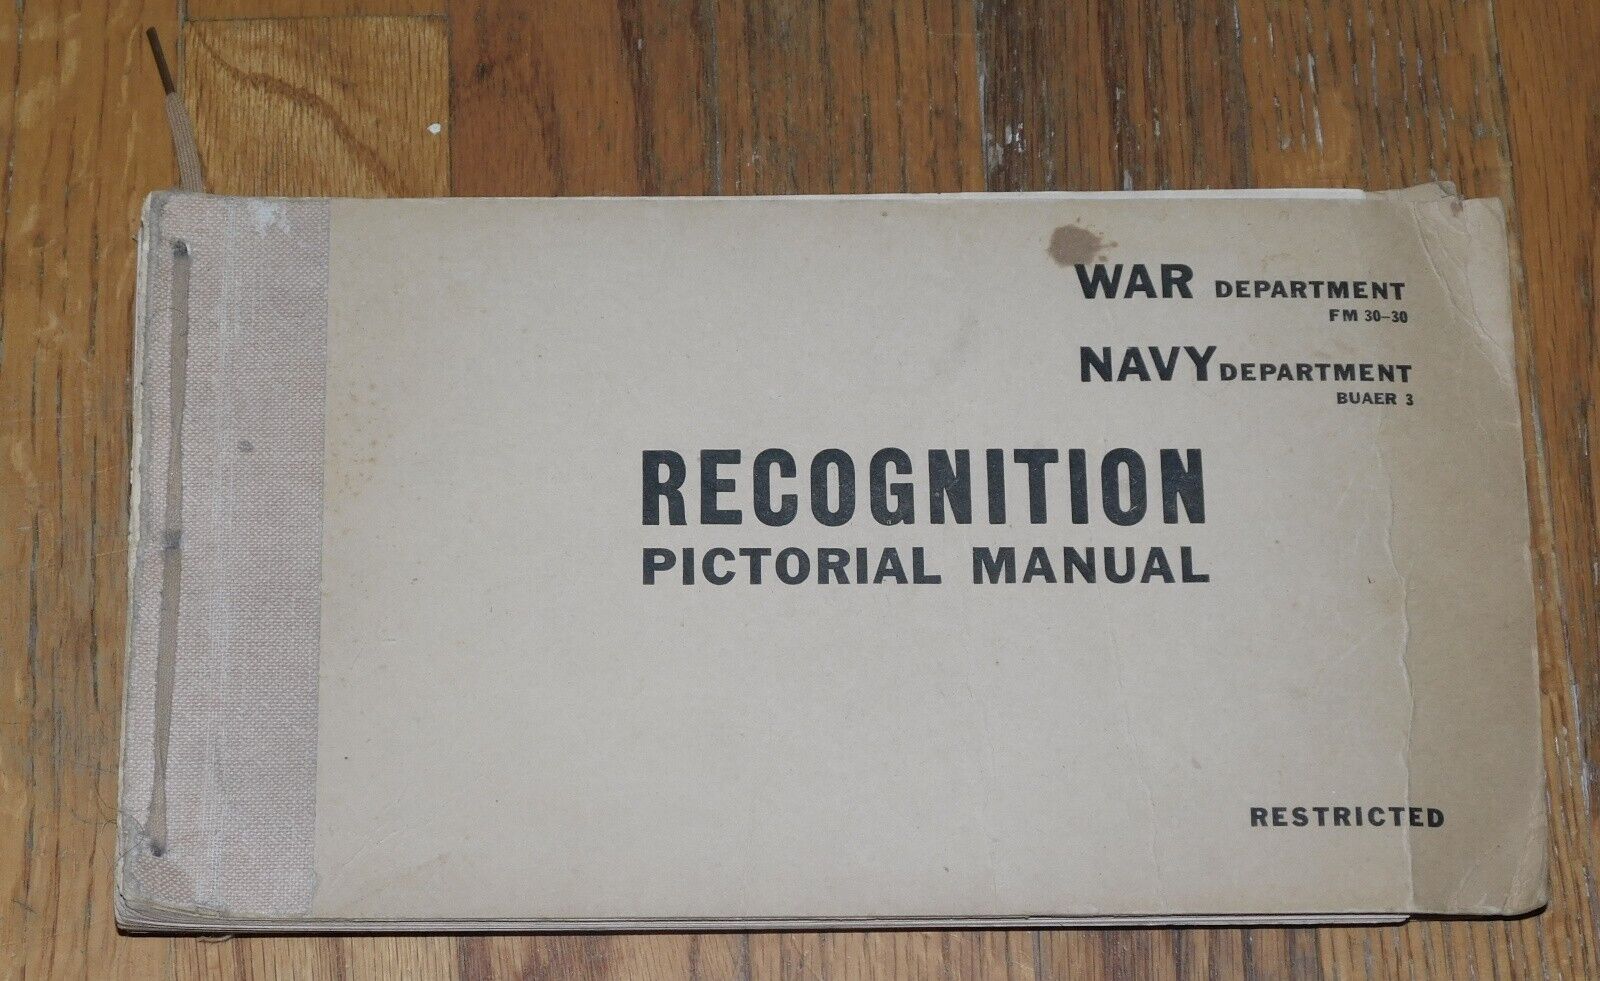 Original WWII War Department FM 30-30 Recognition Pictorial Manual BUAER 3 11-43